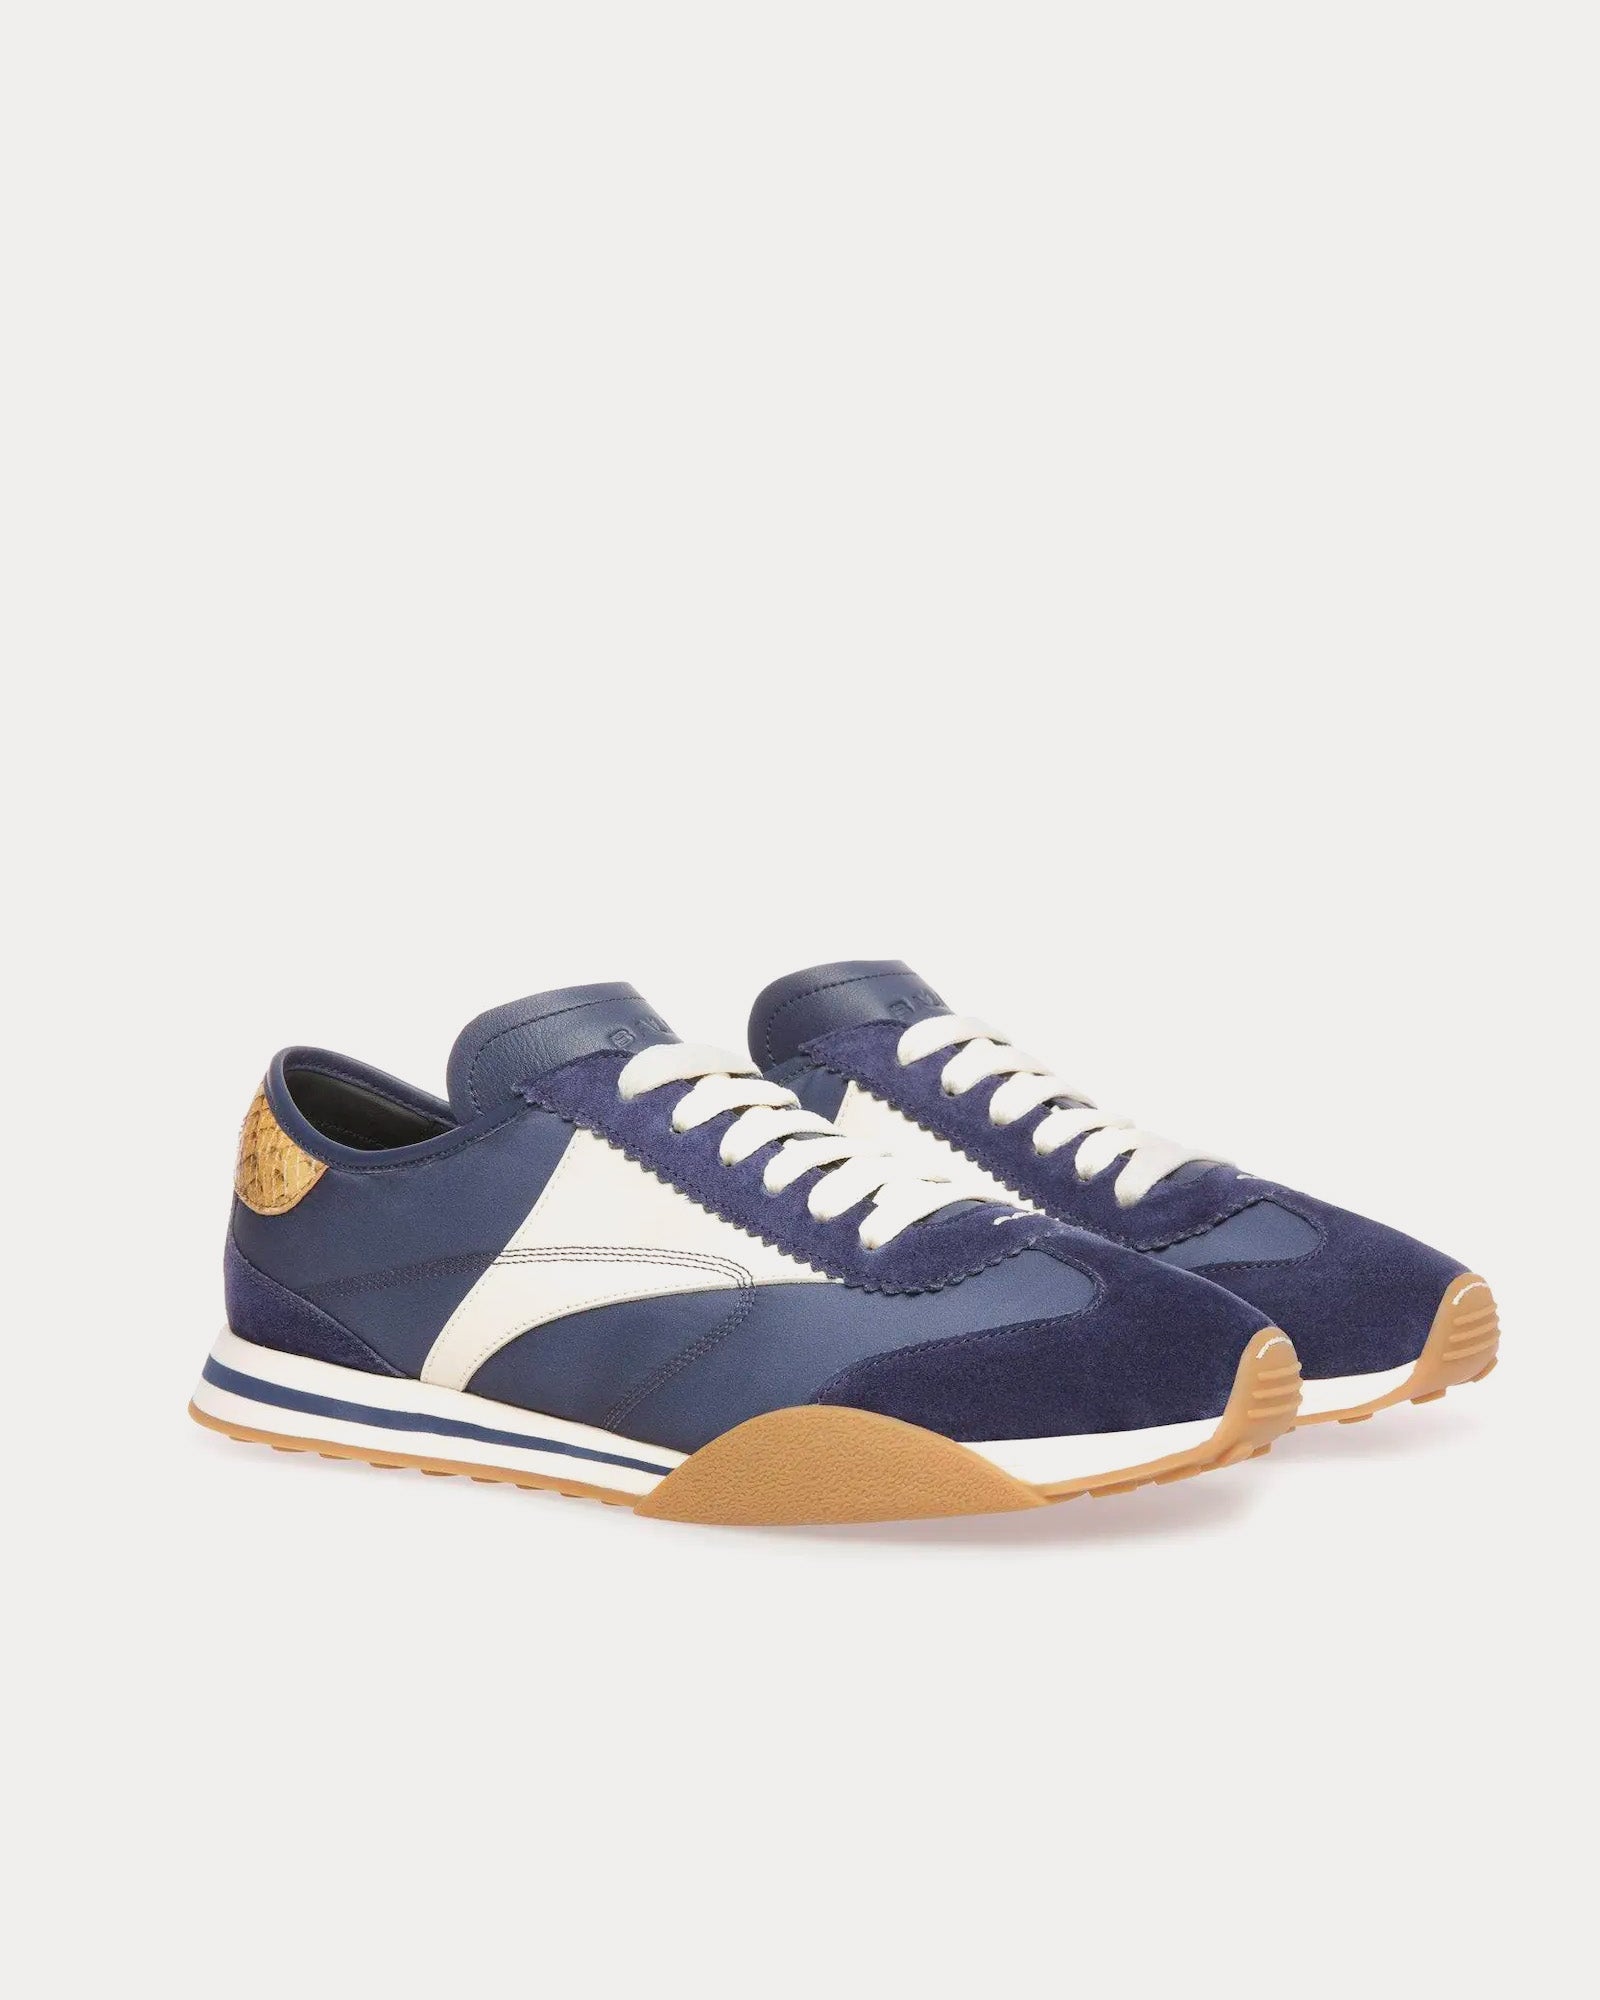 Bally - Sussex Leather & Fabric Marine / Bone Low Top Sneakers